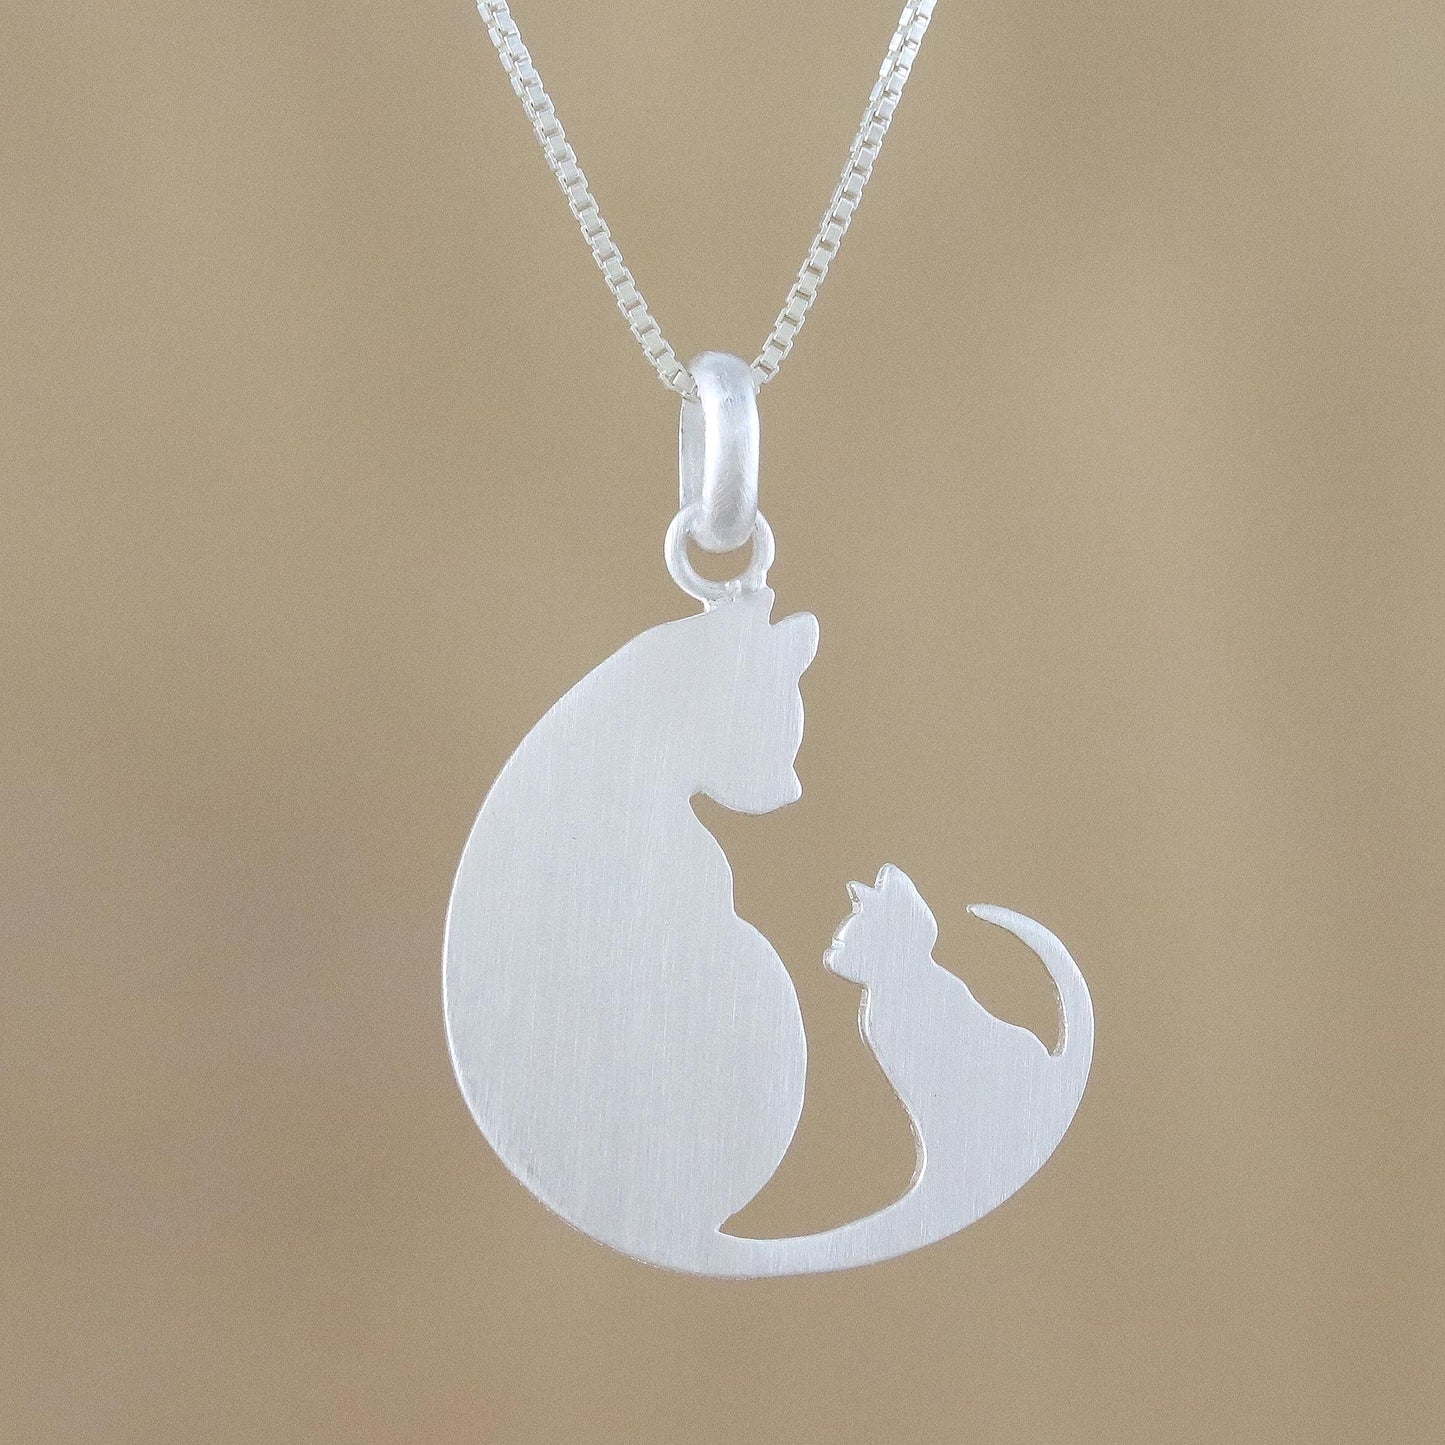 Feline Love Sterling Silver Pendant Necklace of Two Cats from Thailand